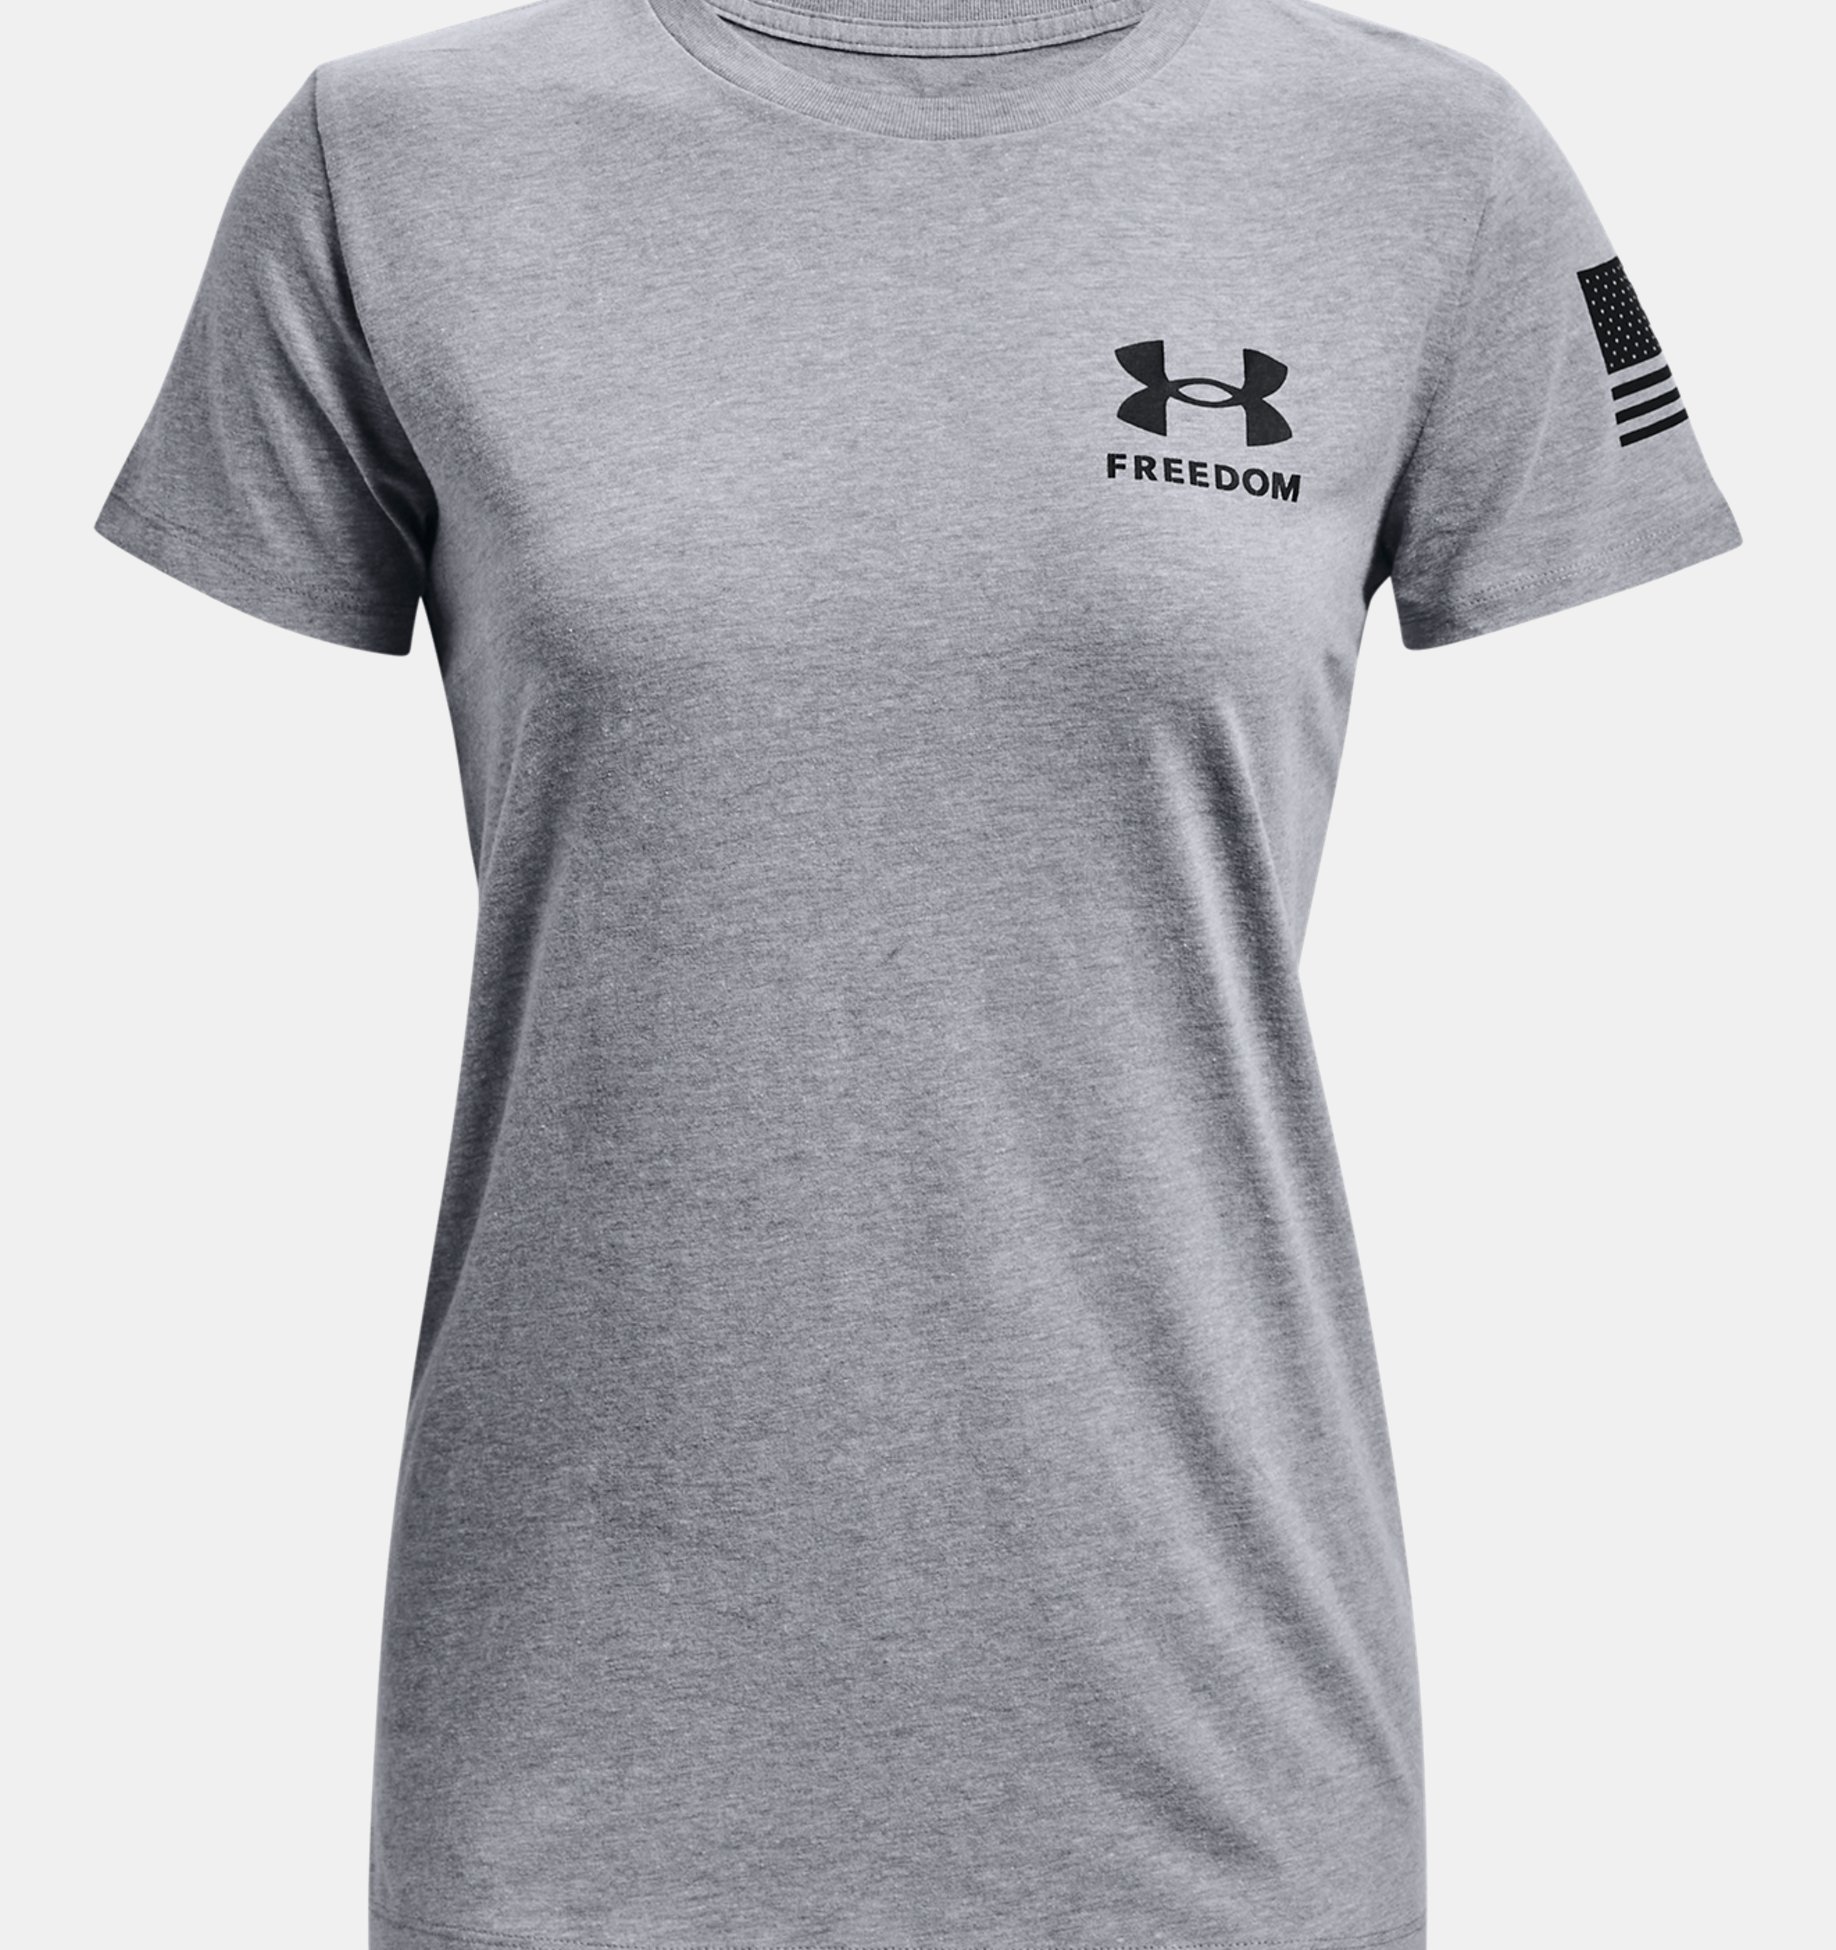 Under Armour Women's Freedom Banner Tee NWT 2021 